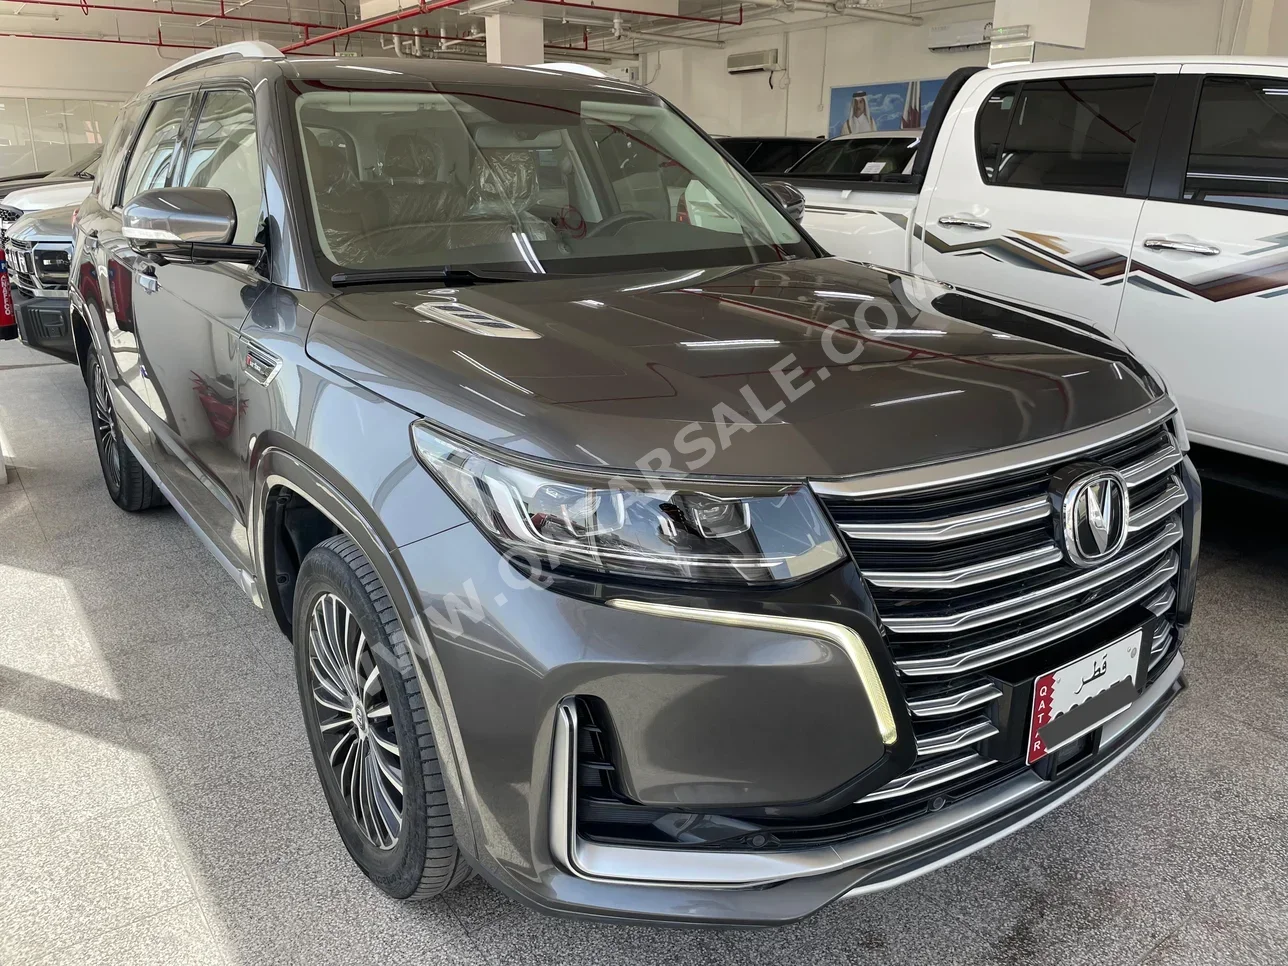 Changan  CS  95  2020  Automatic  29٬000 Km  4 Cylinder  Four Wheel Drive (4WD)  SUV  Gray  With Warranty